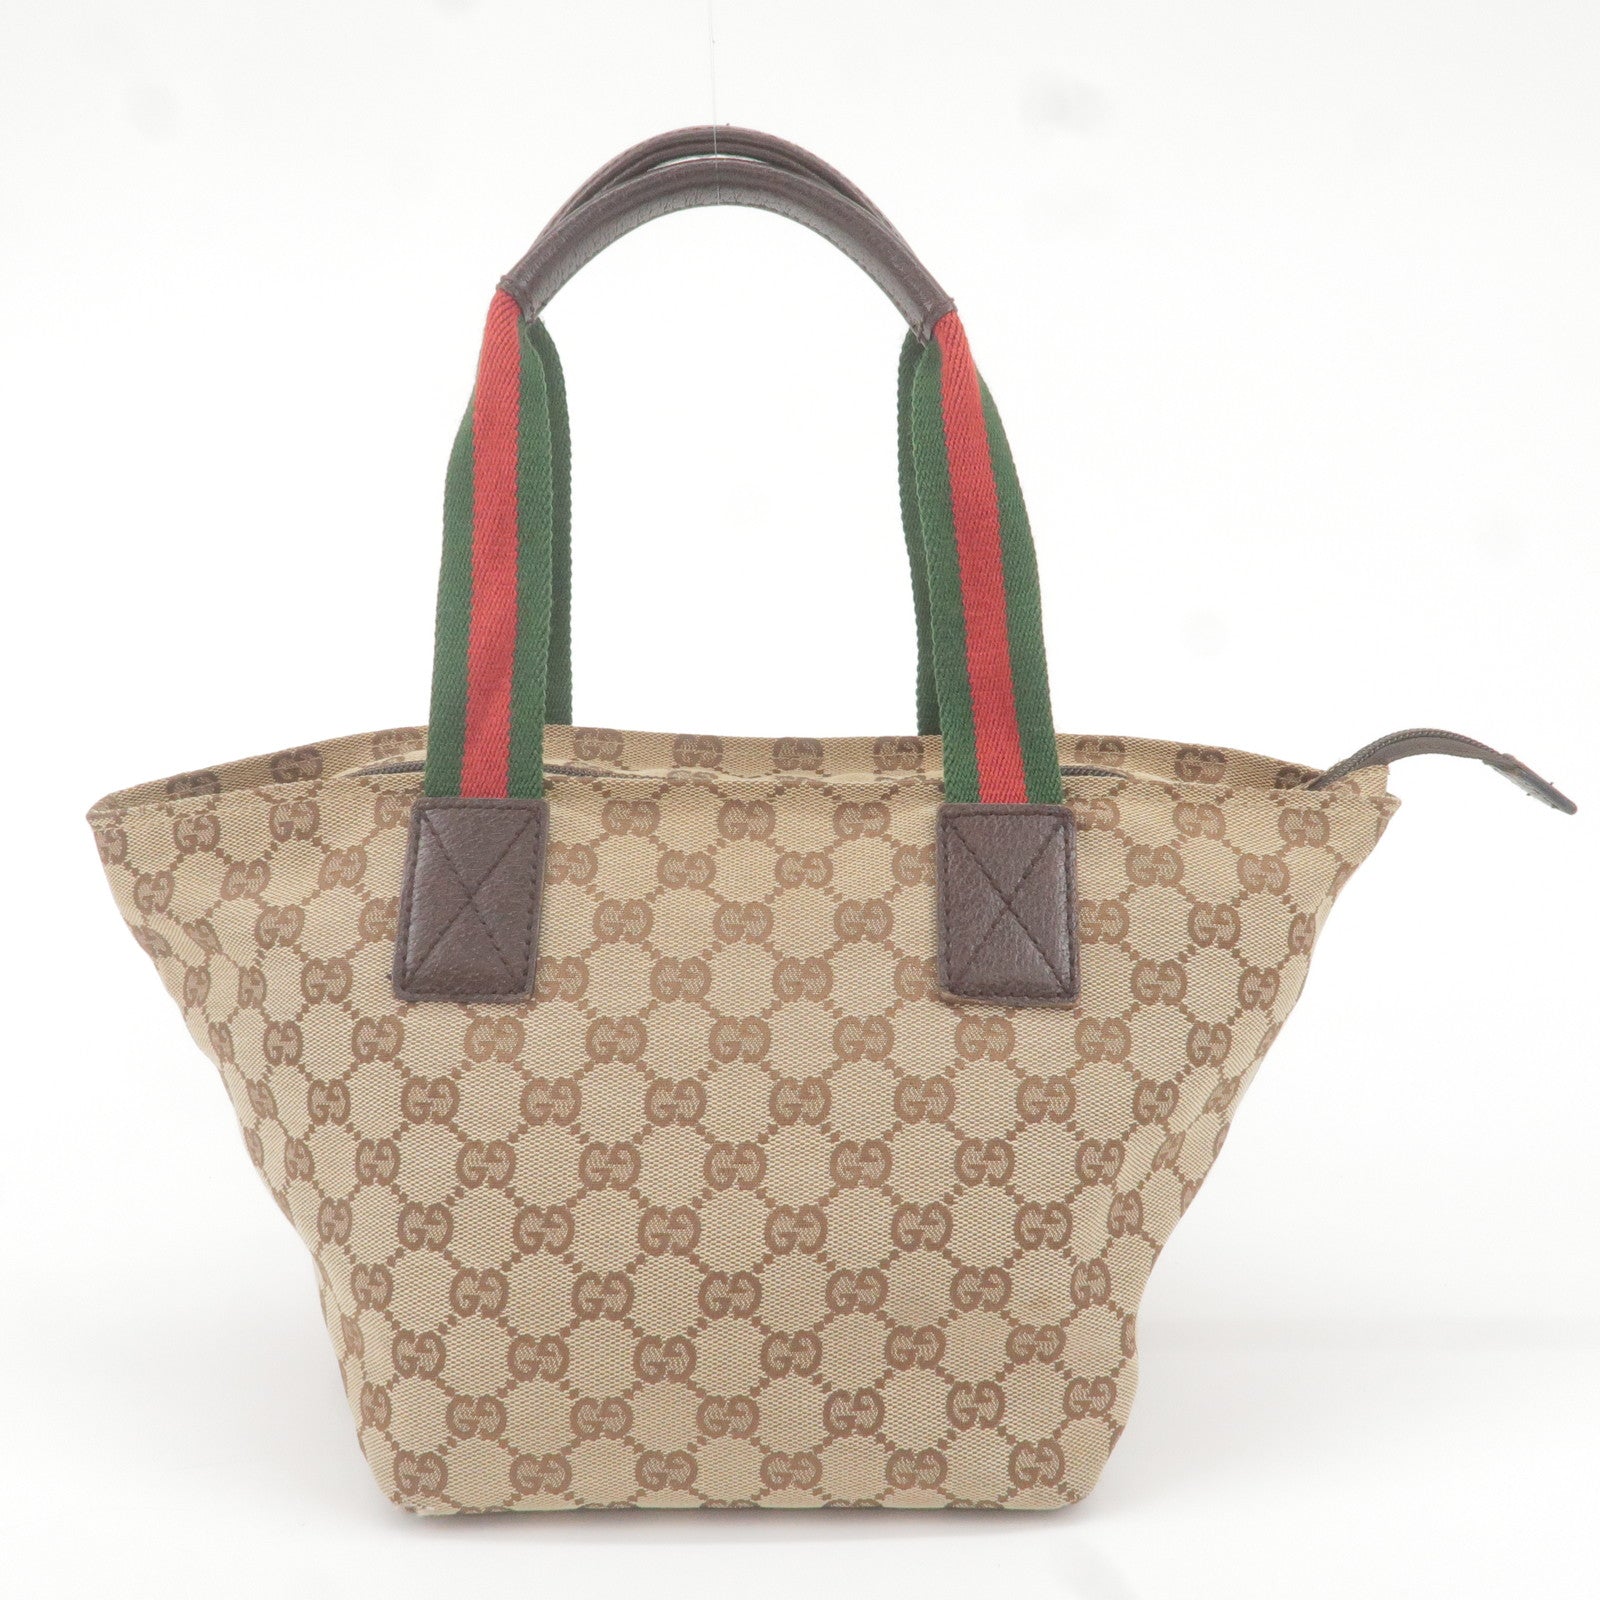 Authentic GUCCI Sherry Line Shoulder Tote Bag Canvas Leather Brown